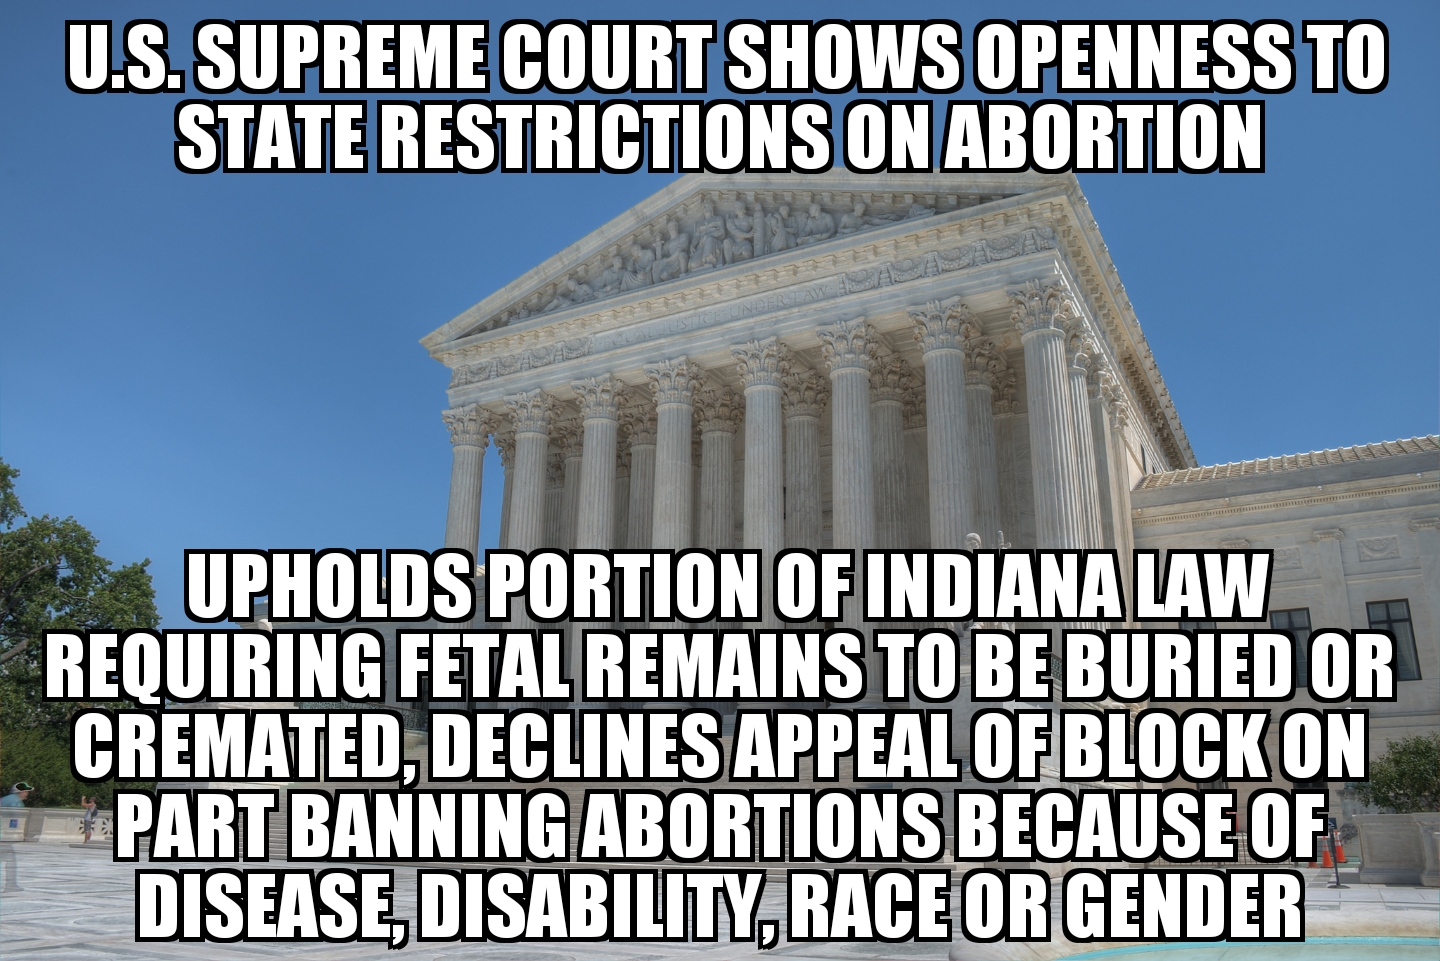 Supreme Court shows openness to state abortion restrictions